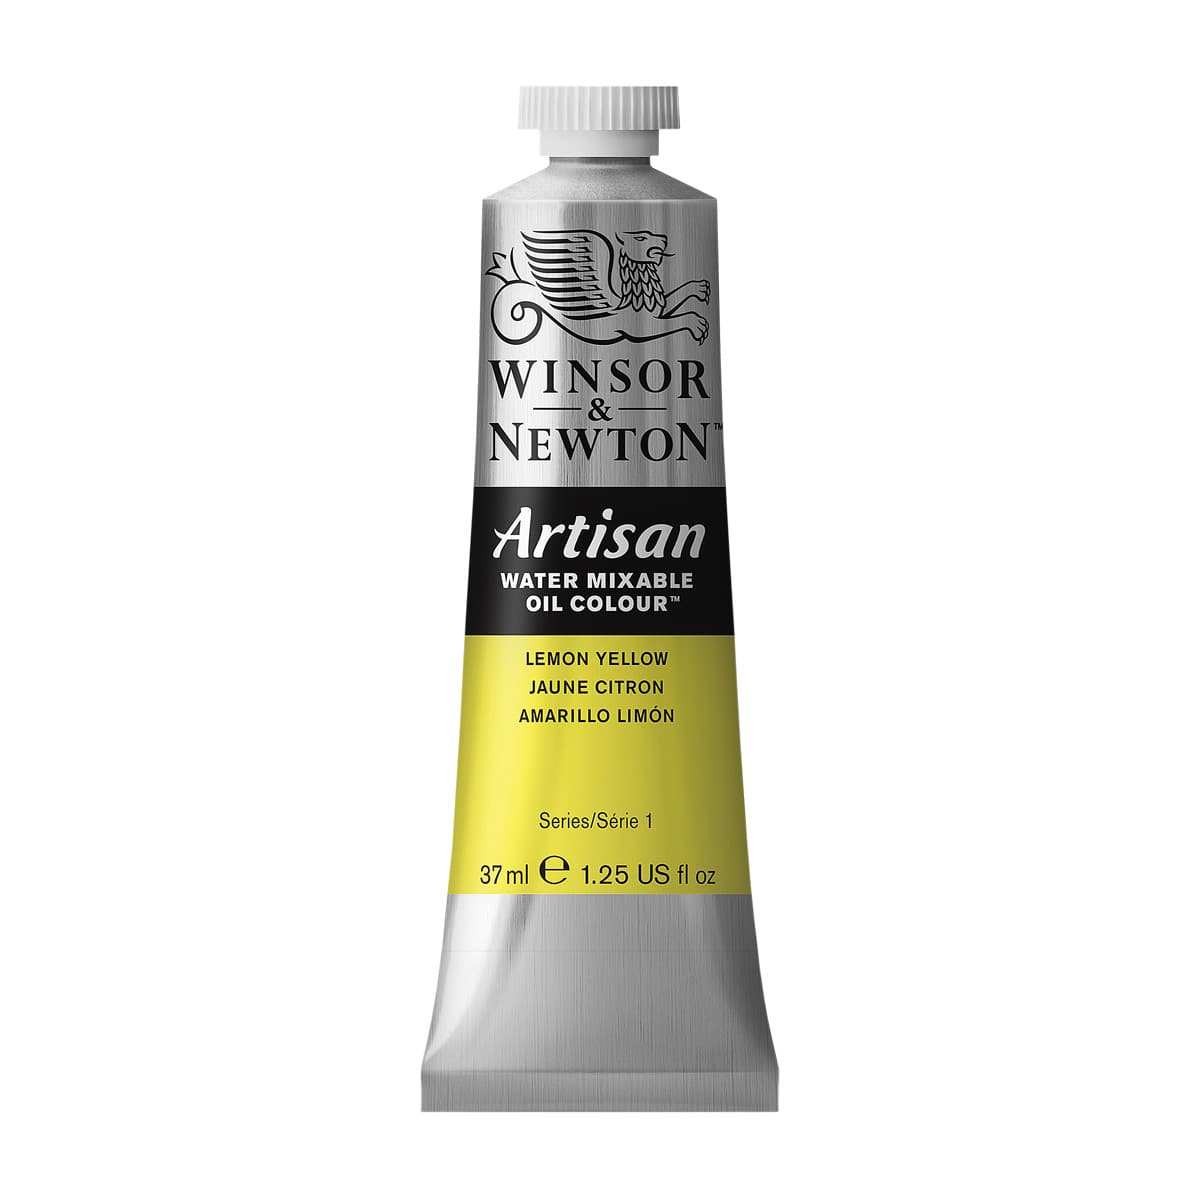  Winsor & Newton Artisan Water Mixable Oil Color Paint